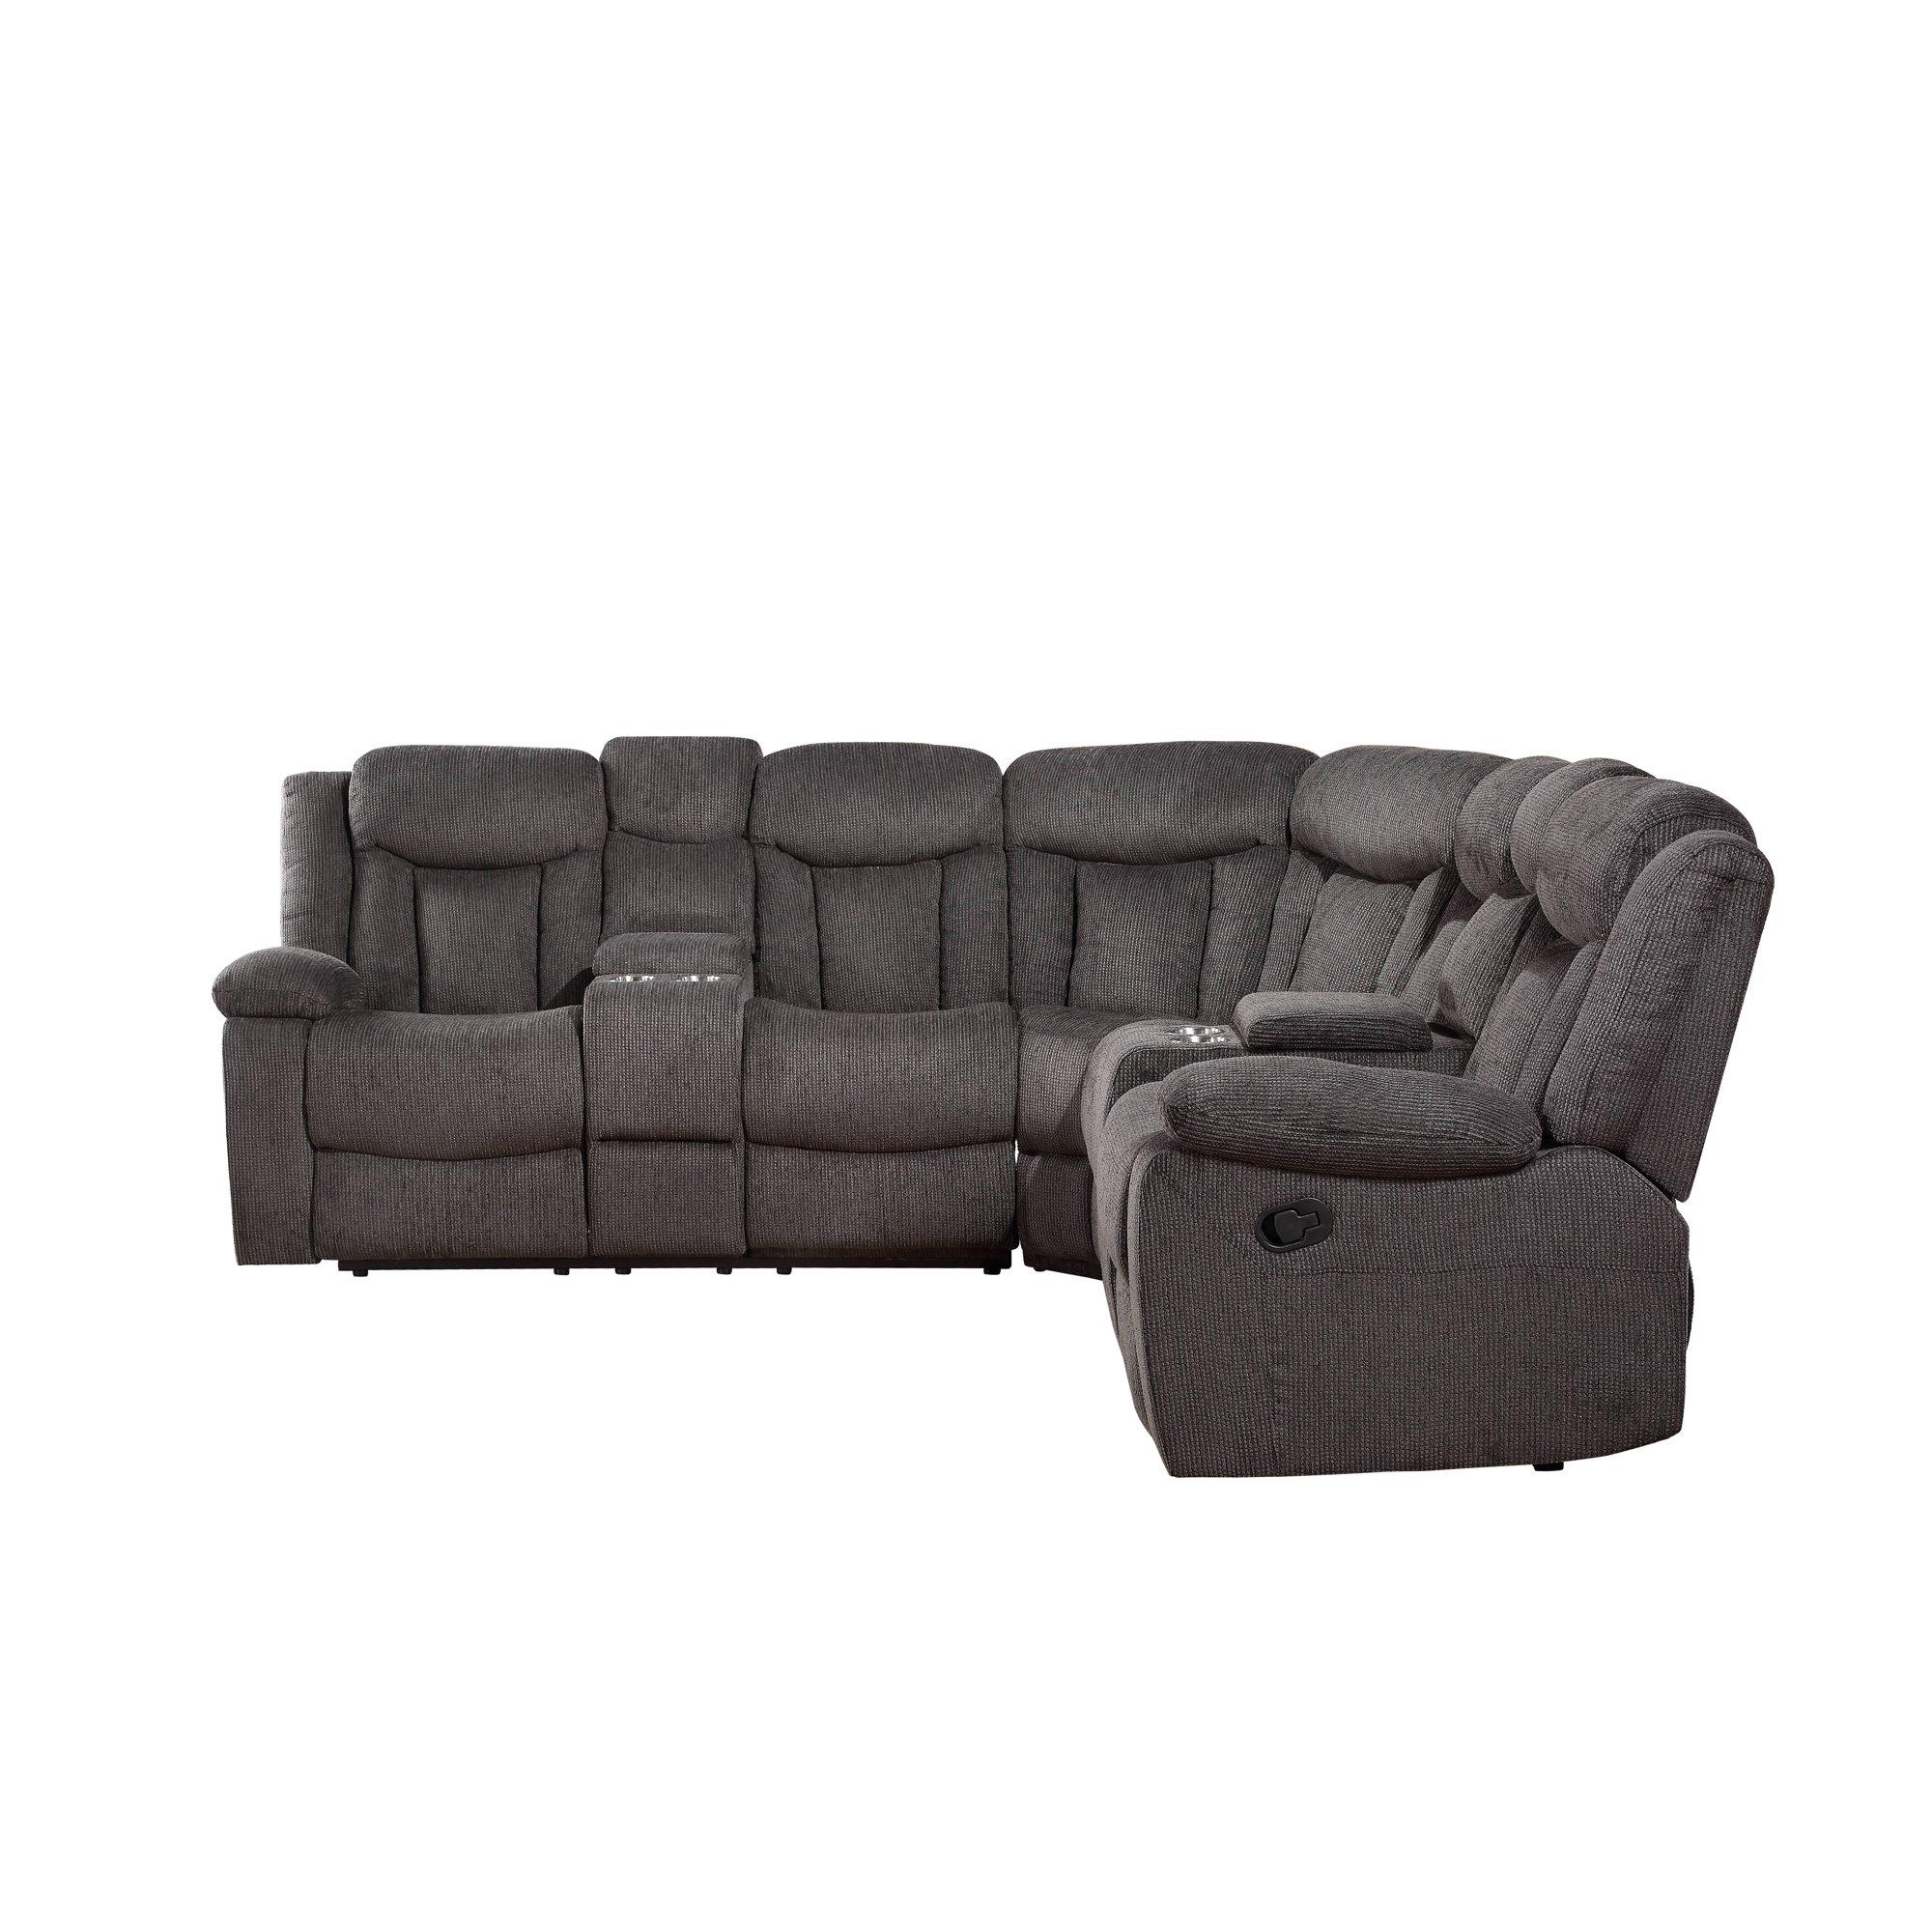 

    
Contemporary Dark Brown Fabric Motion Sectional Sofa by Acme Rylan 54965-3pcs
